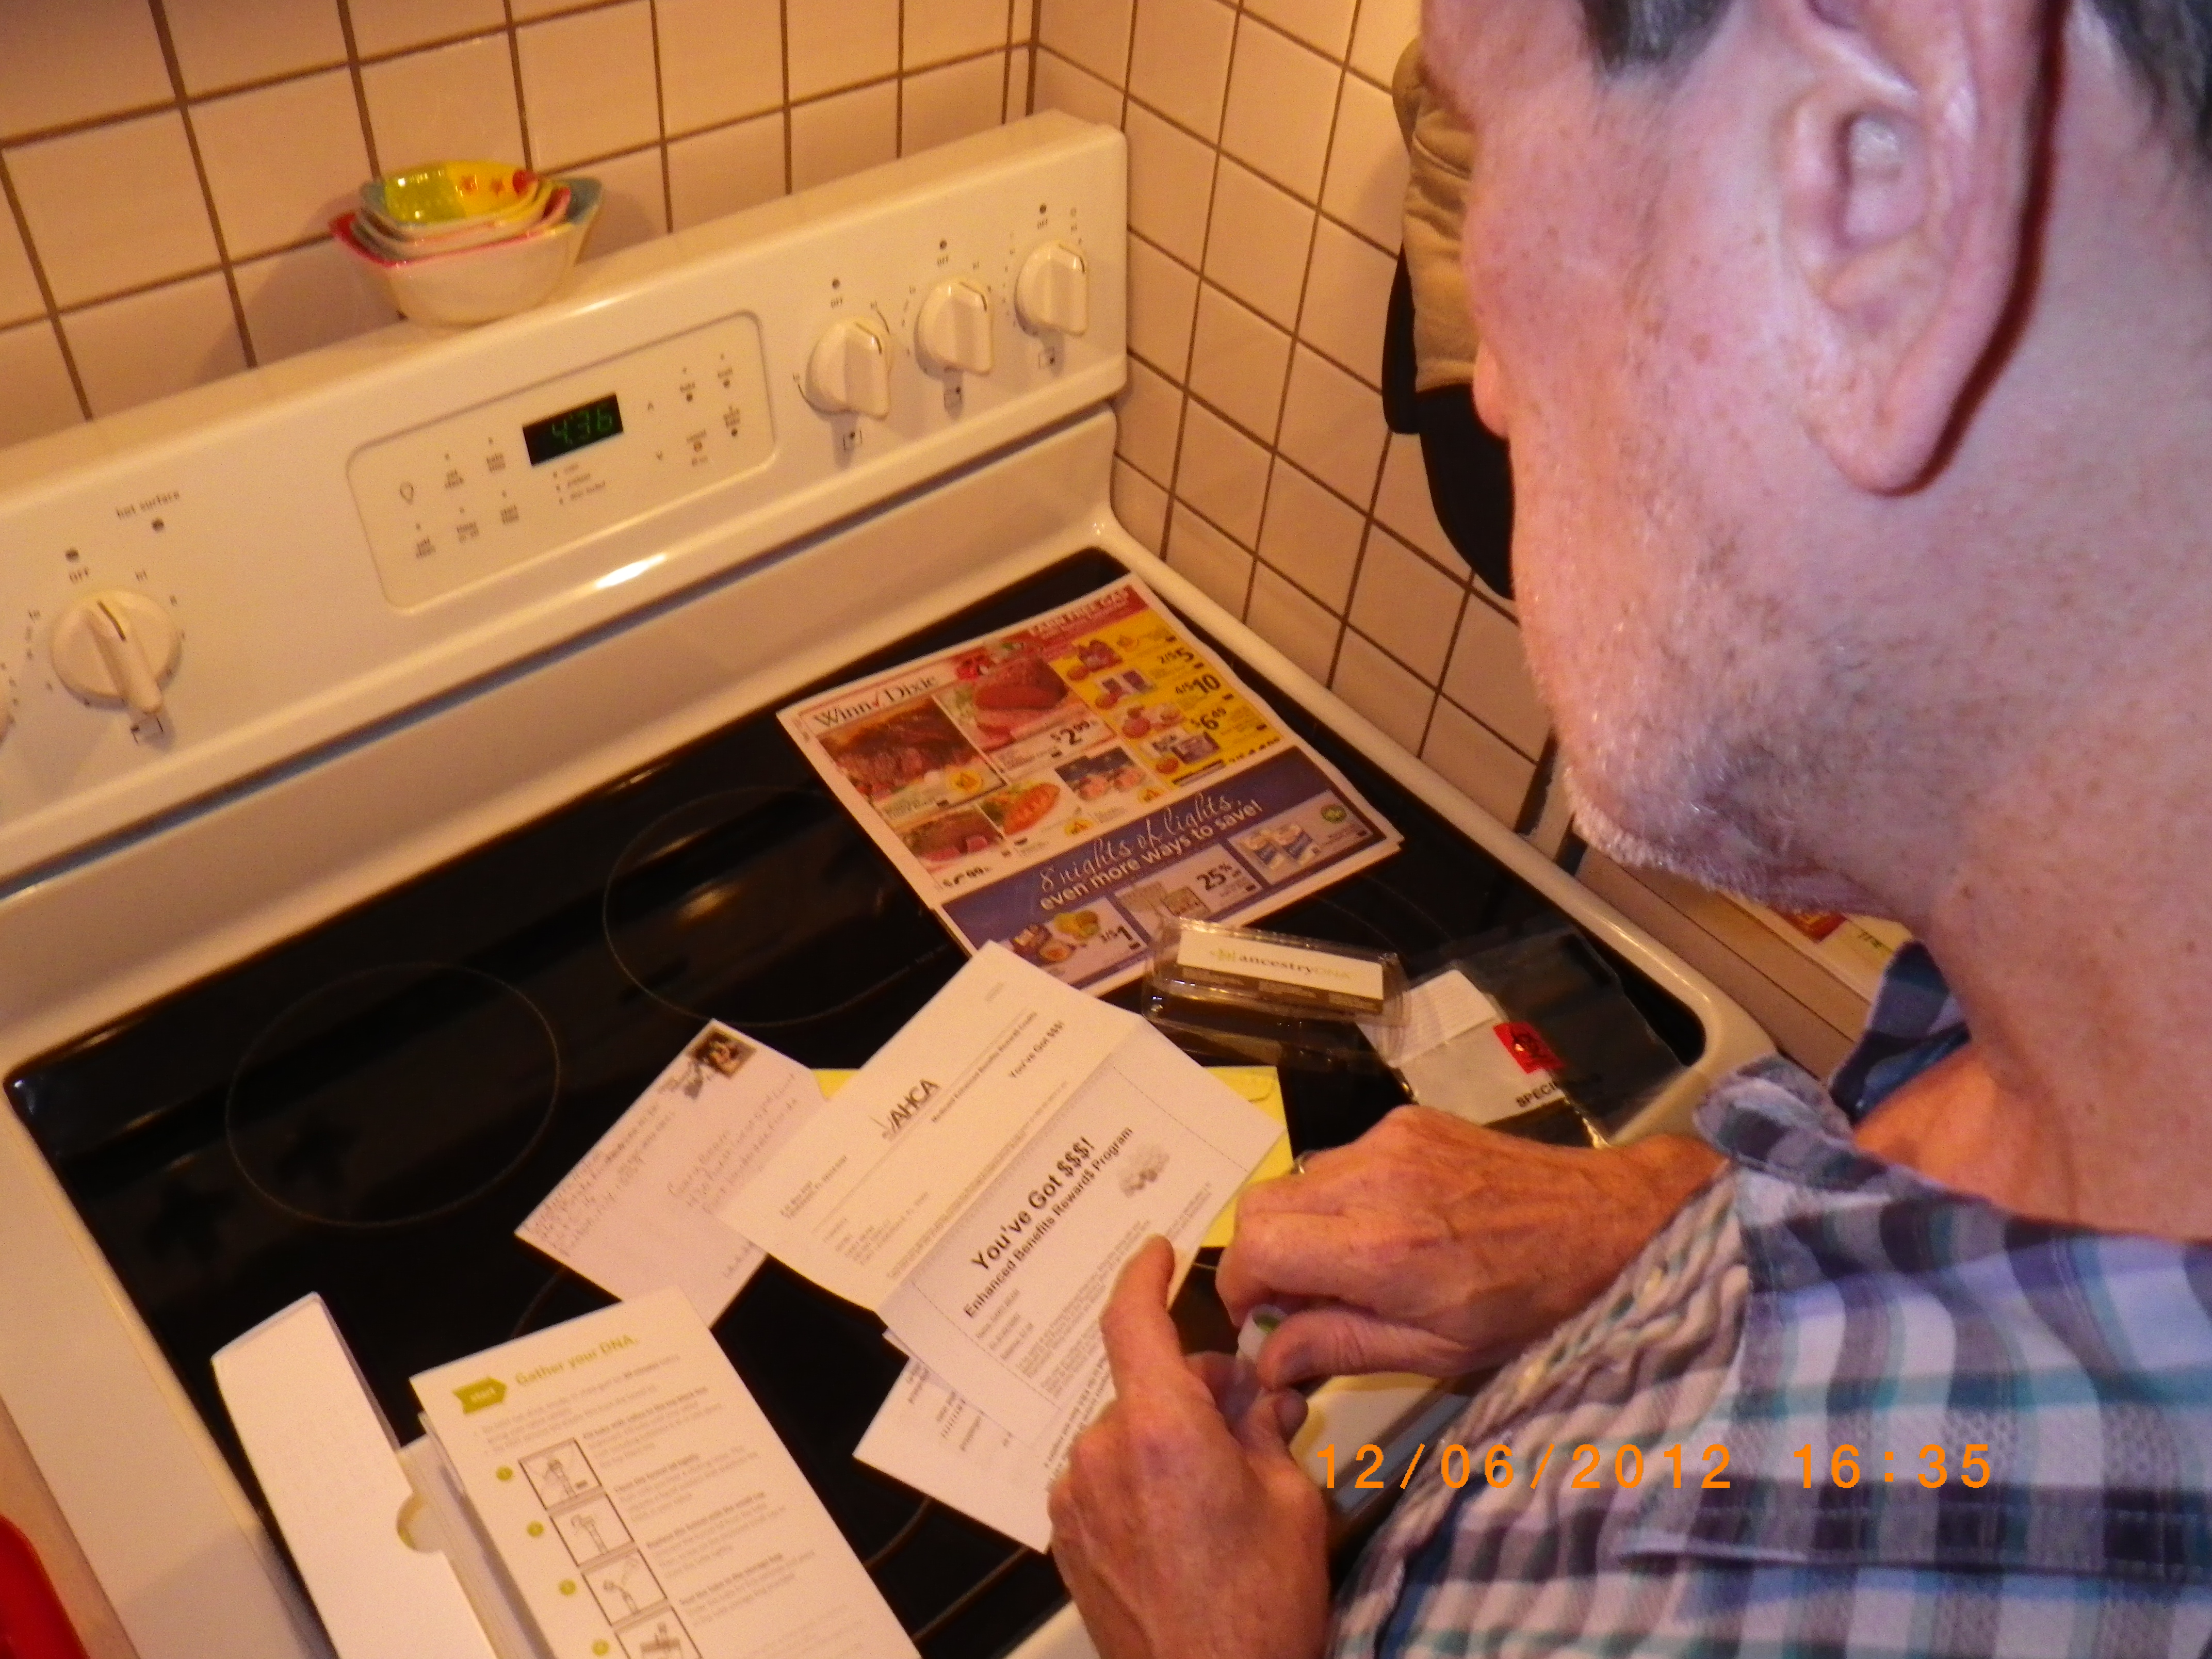 A white male reads over a pile of genetic testing kit contents on a kitchen stove top.